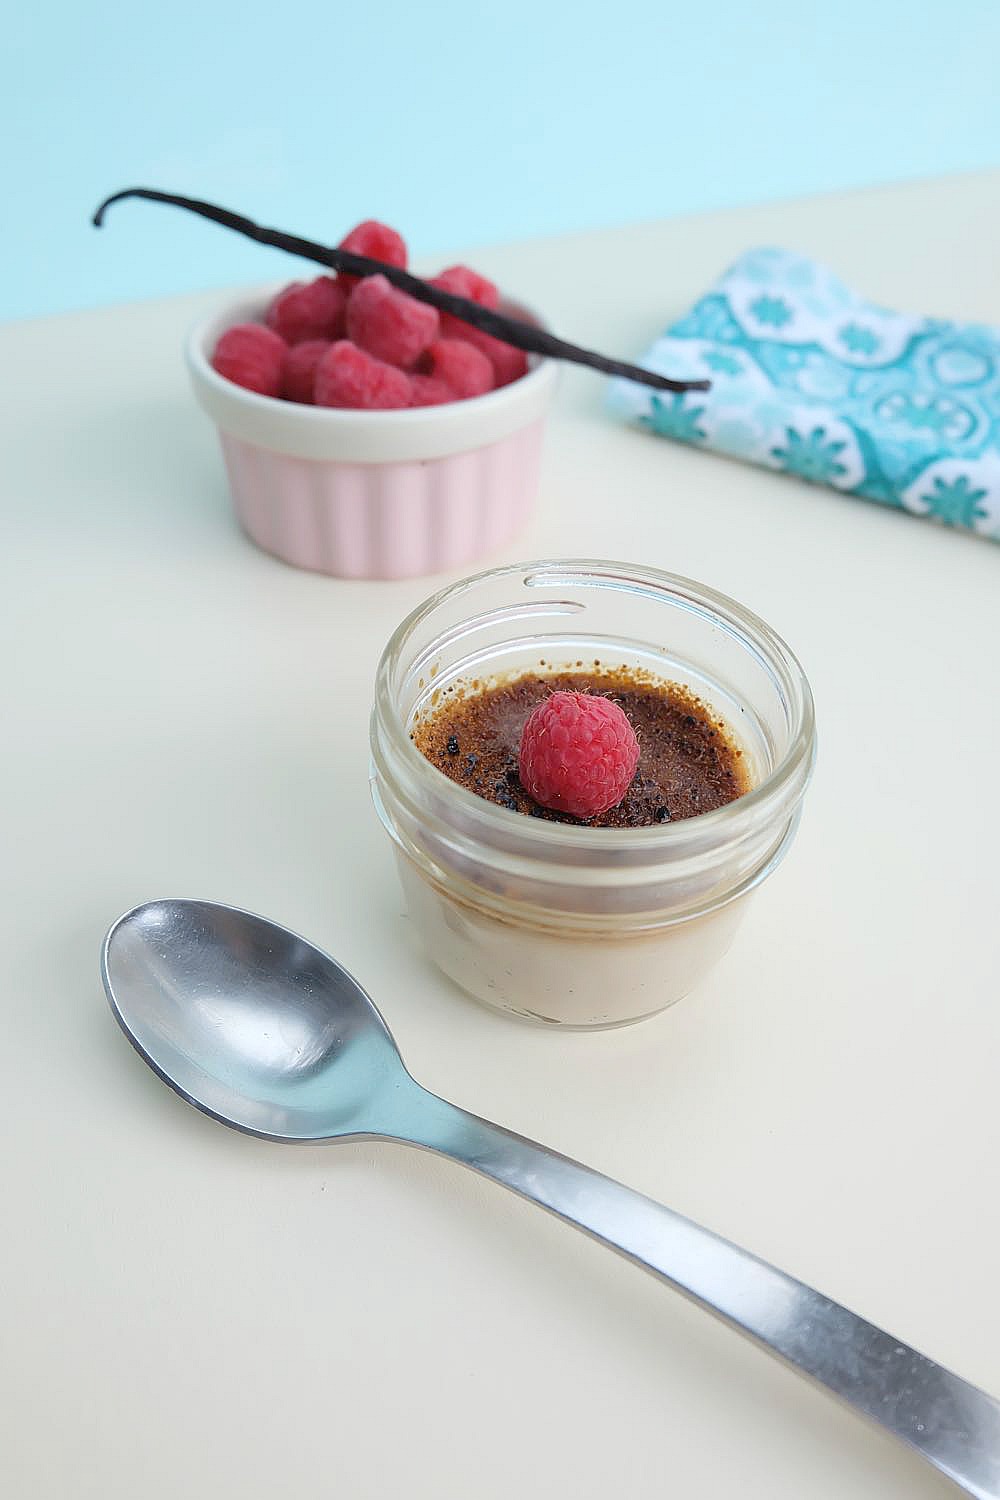 This Raspberry Crème Brûlée Recipe Made With Coconut Sugar is delicious and easy to make! The cream is infused with raspberries and vanilla beans. Topped with coconut sugar there are instructions on how to get the crunchy creme brulee top without using a kitchen torch! No special equipment required!